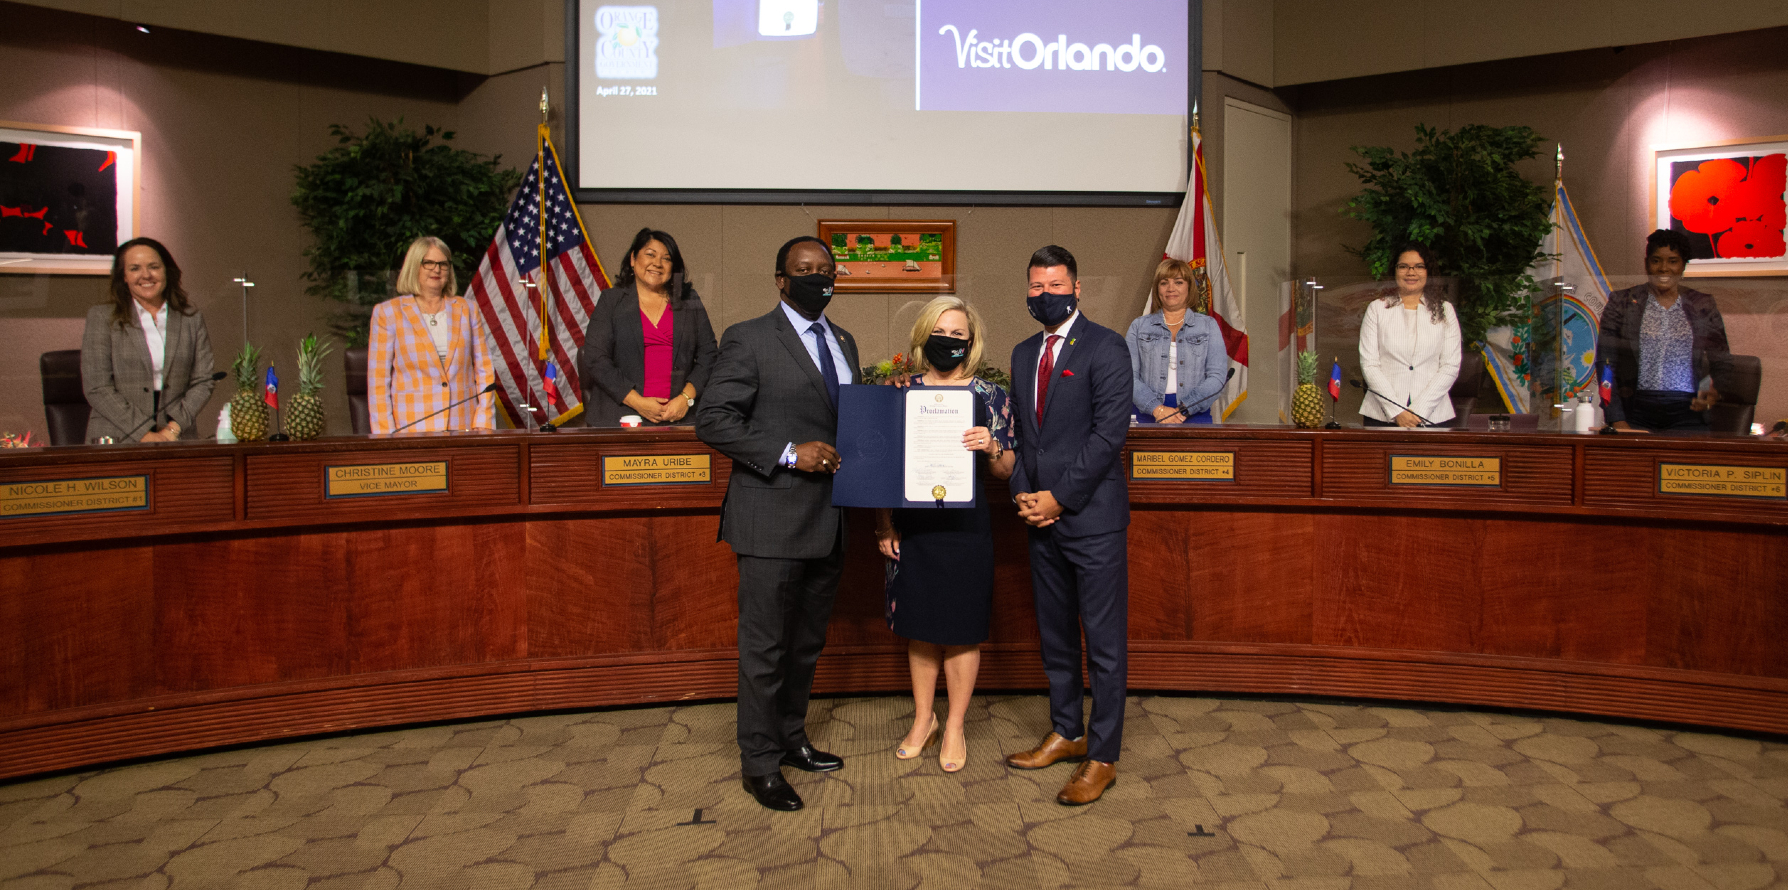 Foreground, from left to right: Mayor Jerry Demings; Casandra Matej, President and CEO of Visit Orlando; Robert Agrusa of the Central Florida Hotel & Lodging Association 